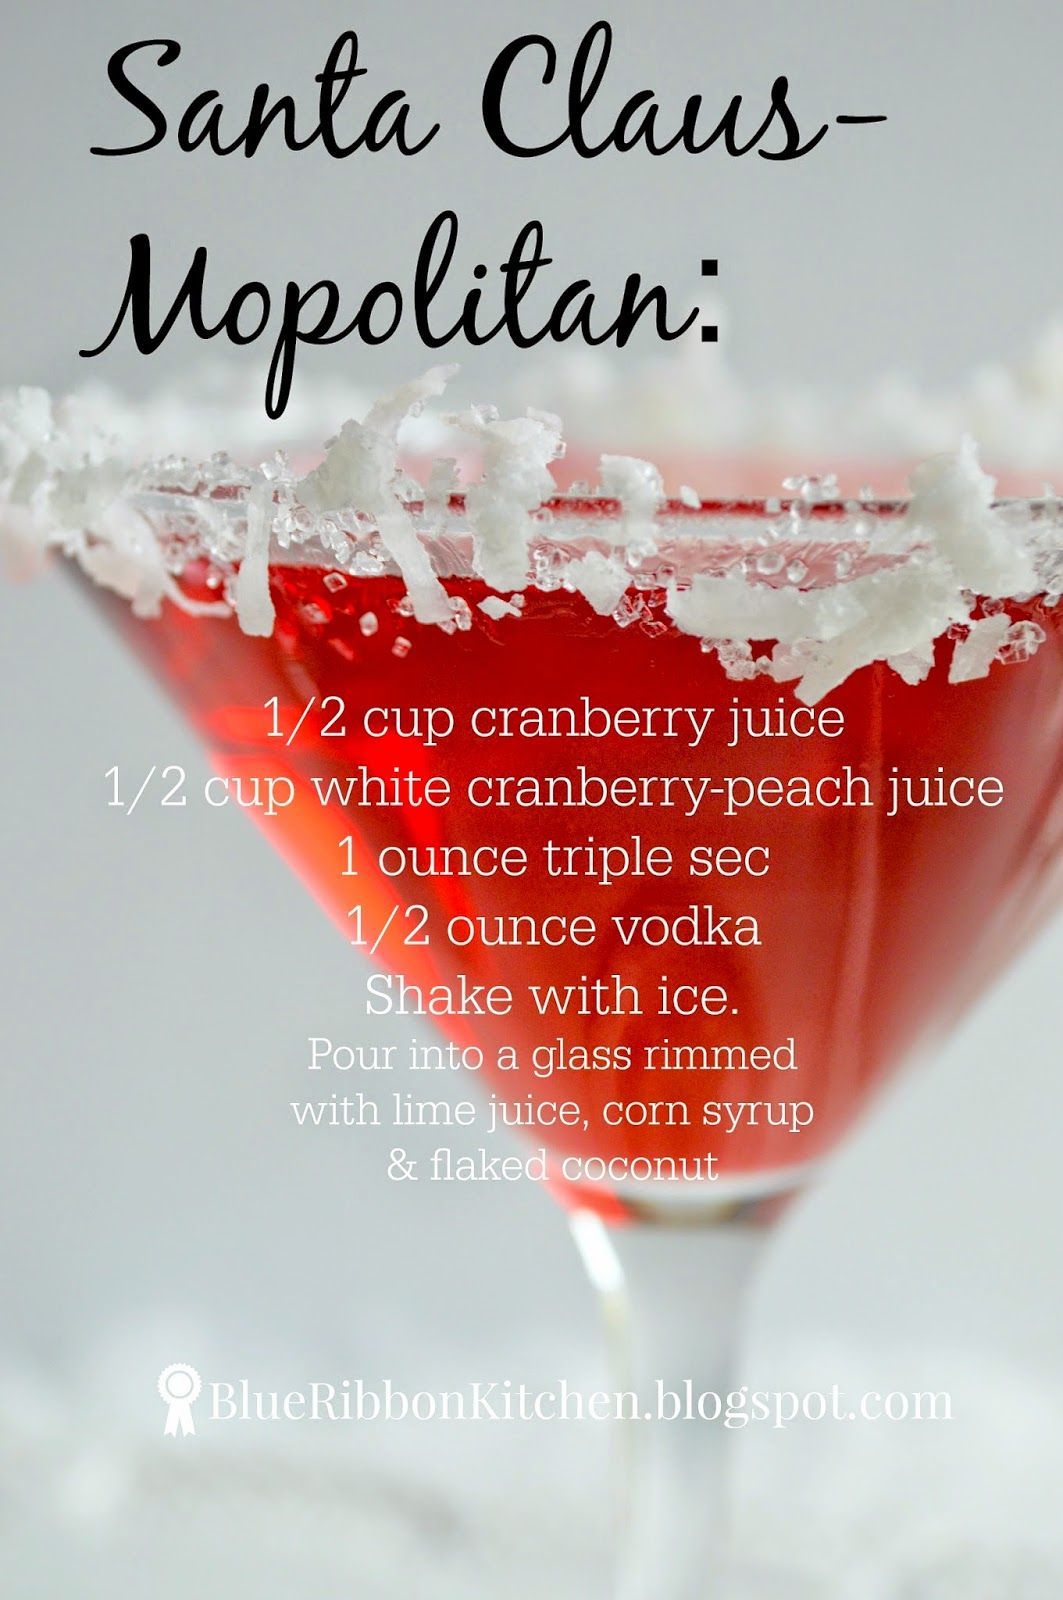 Holiday cosmopolitan signature drink for one serving or for a crowd.  Santa Claus themed drink